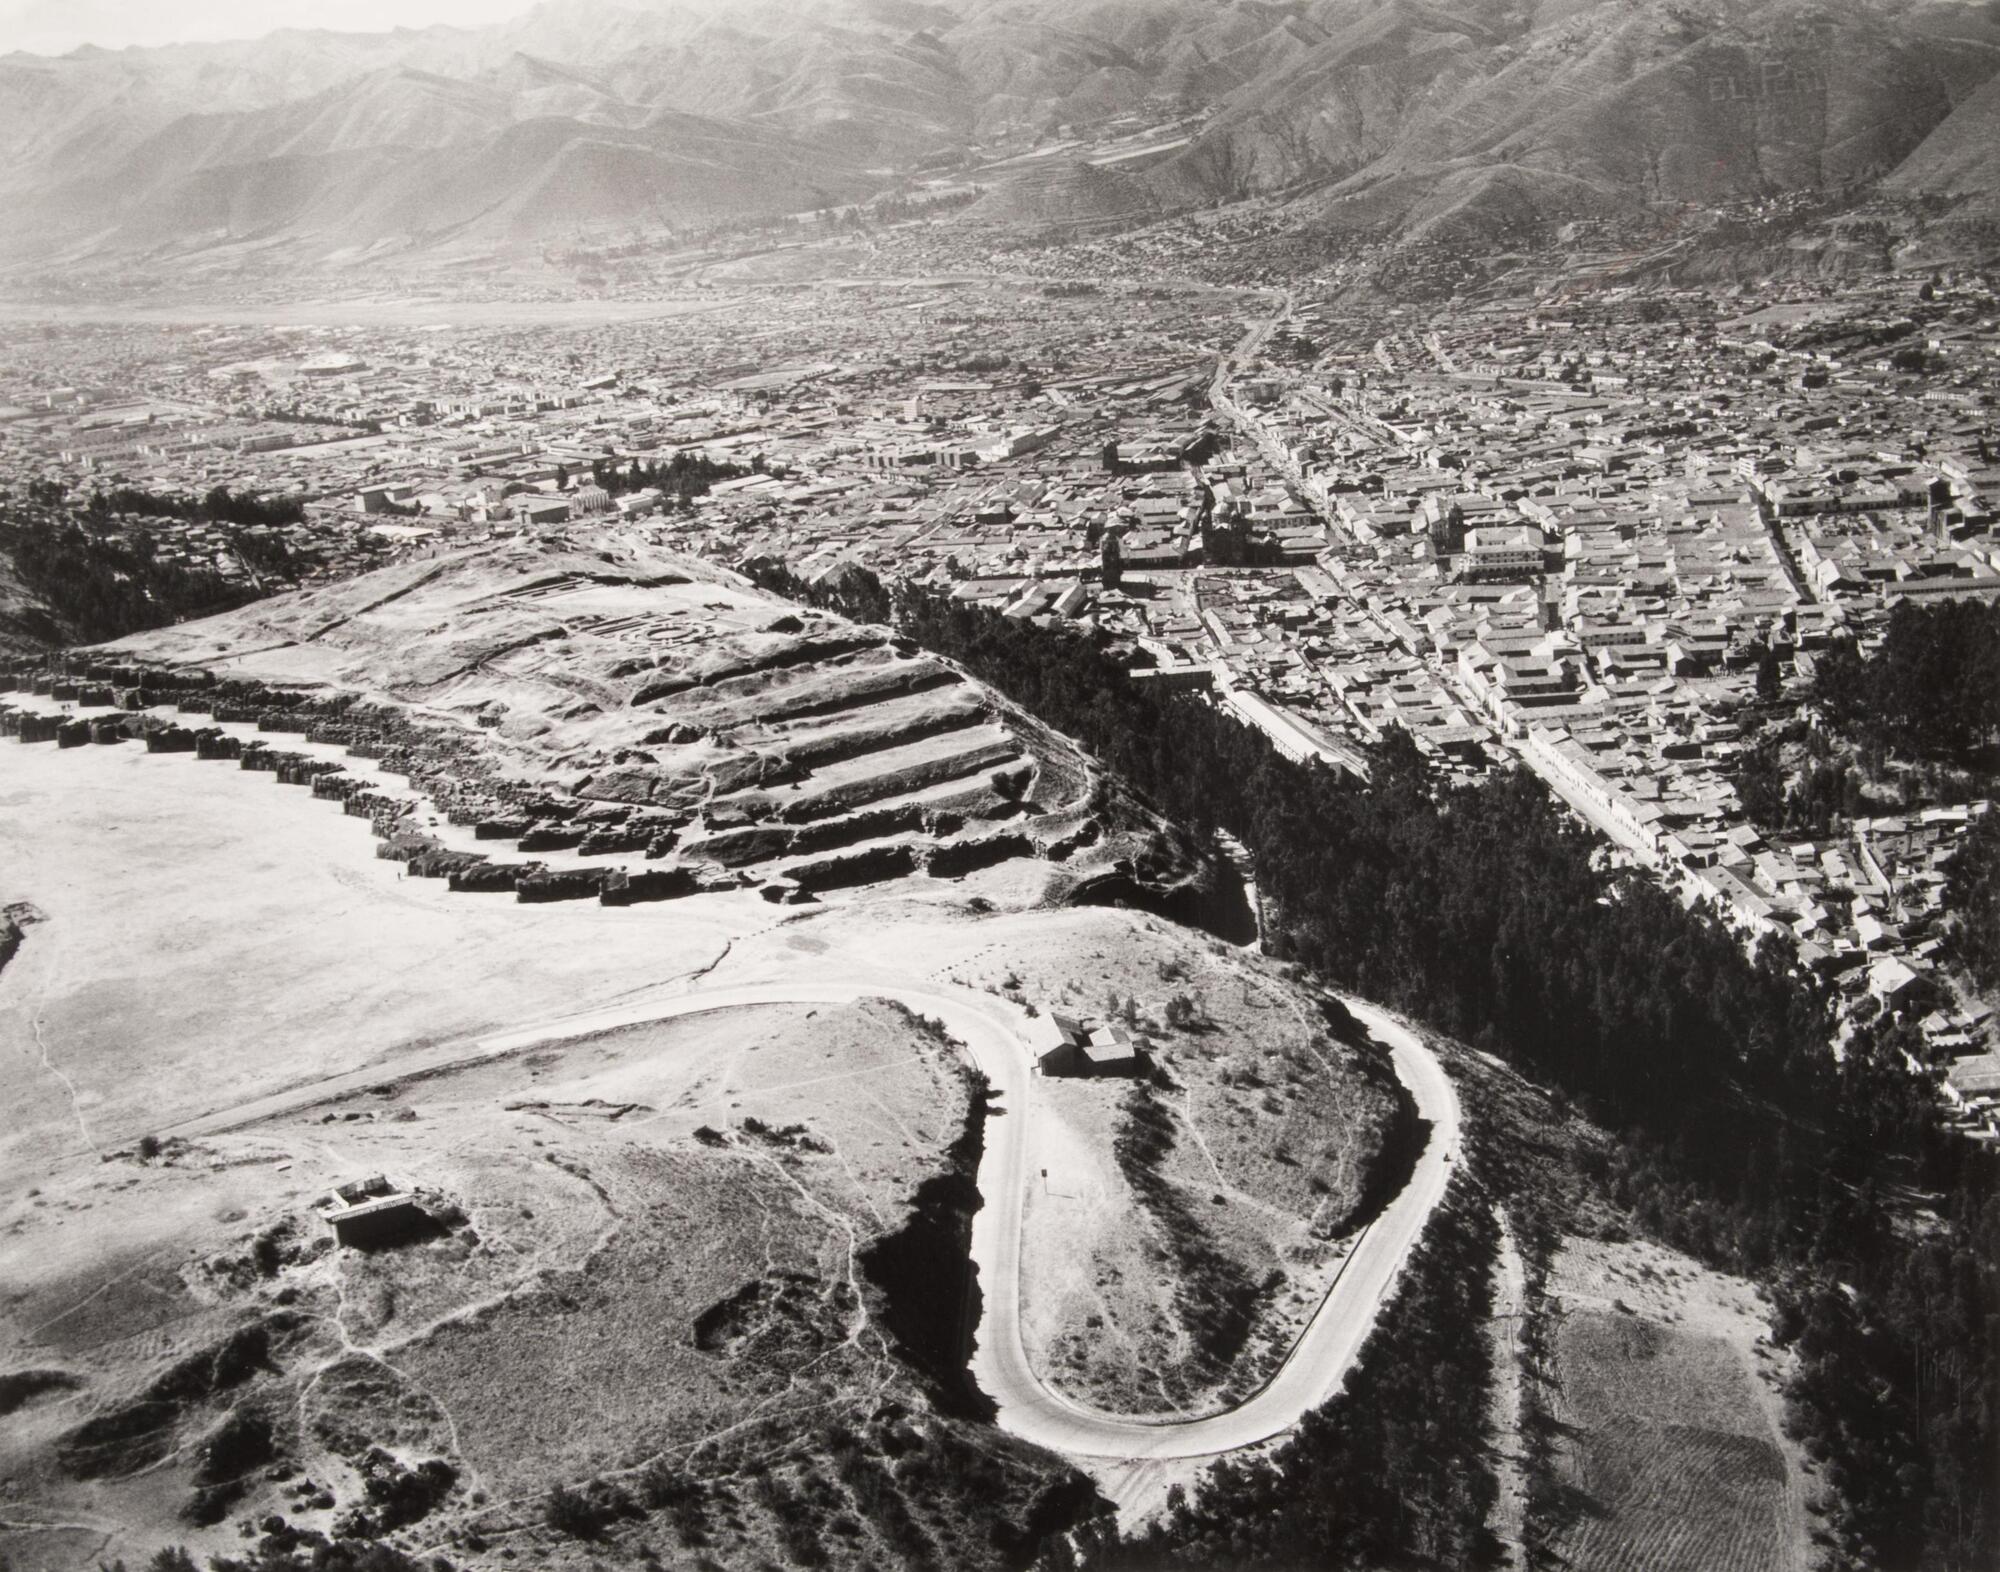 This photograph depicts an aerial view of an ancient citadel overlooking a city.